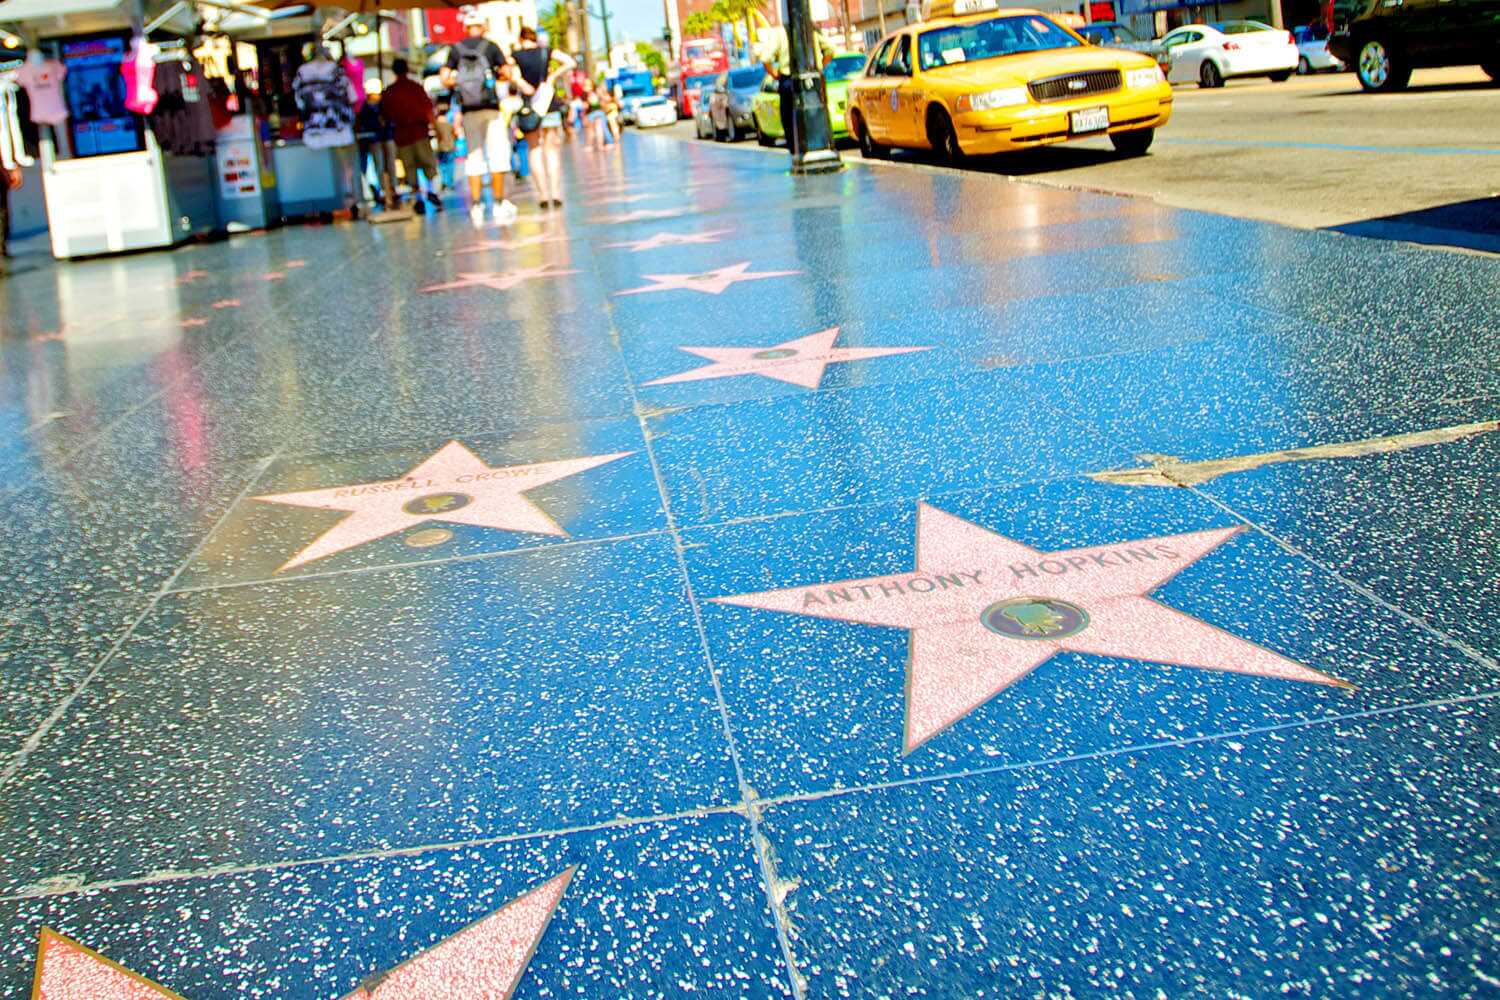 Los Angeles limo tours: The Walk of Stars